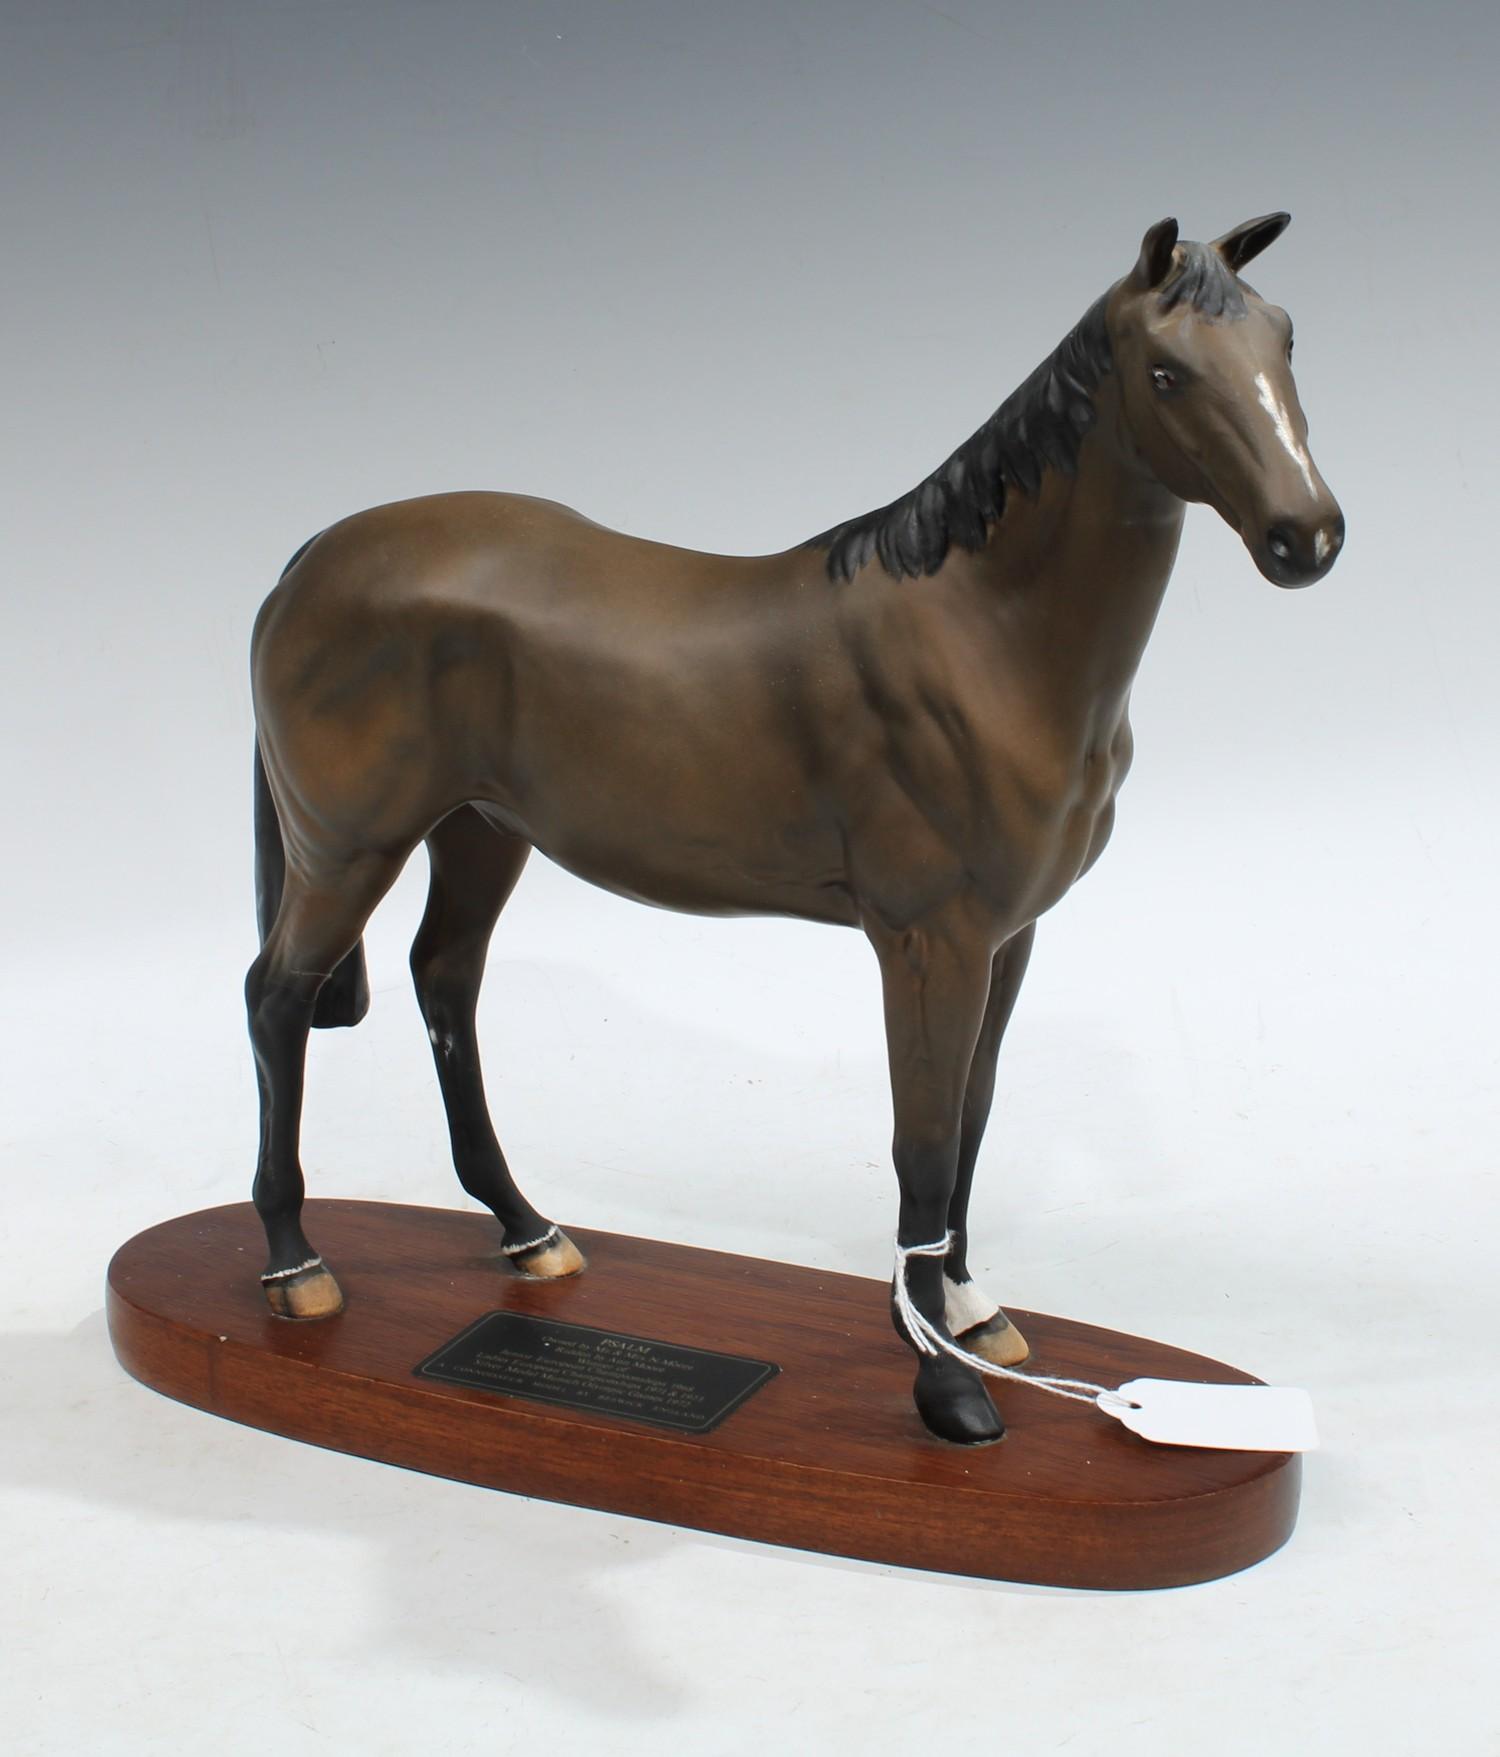 A Beswick Connoisseur model of a racehorse, Psalm, mounted on wooden base